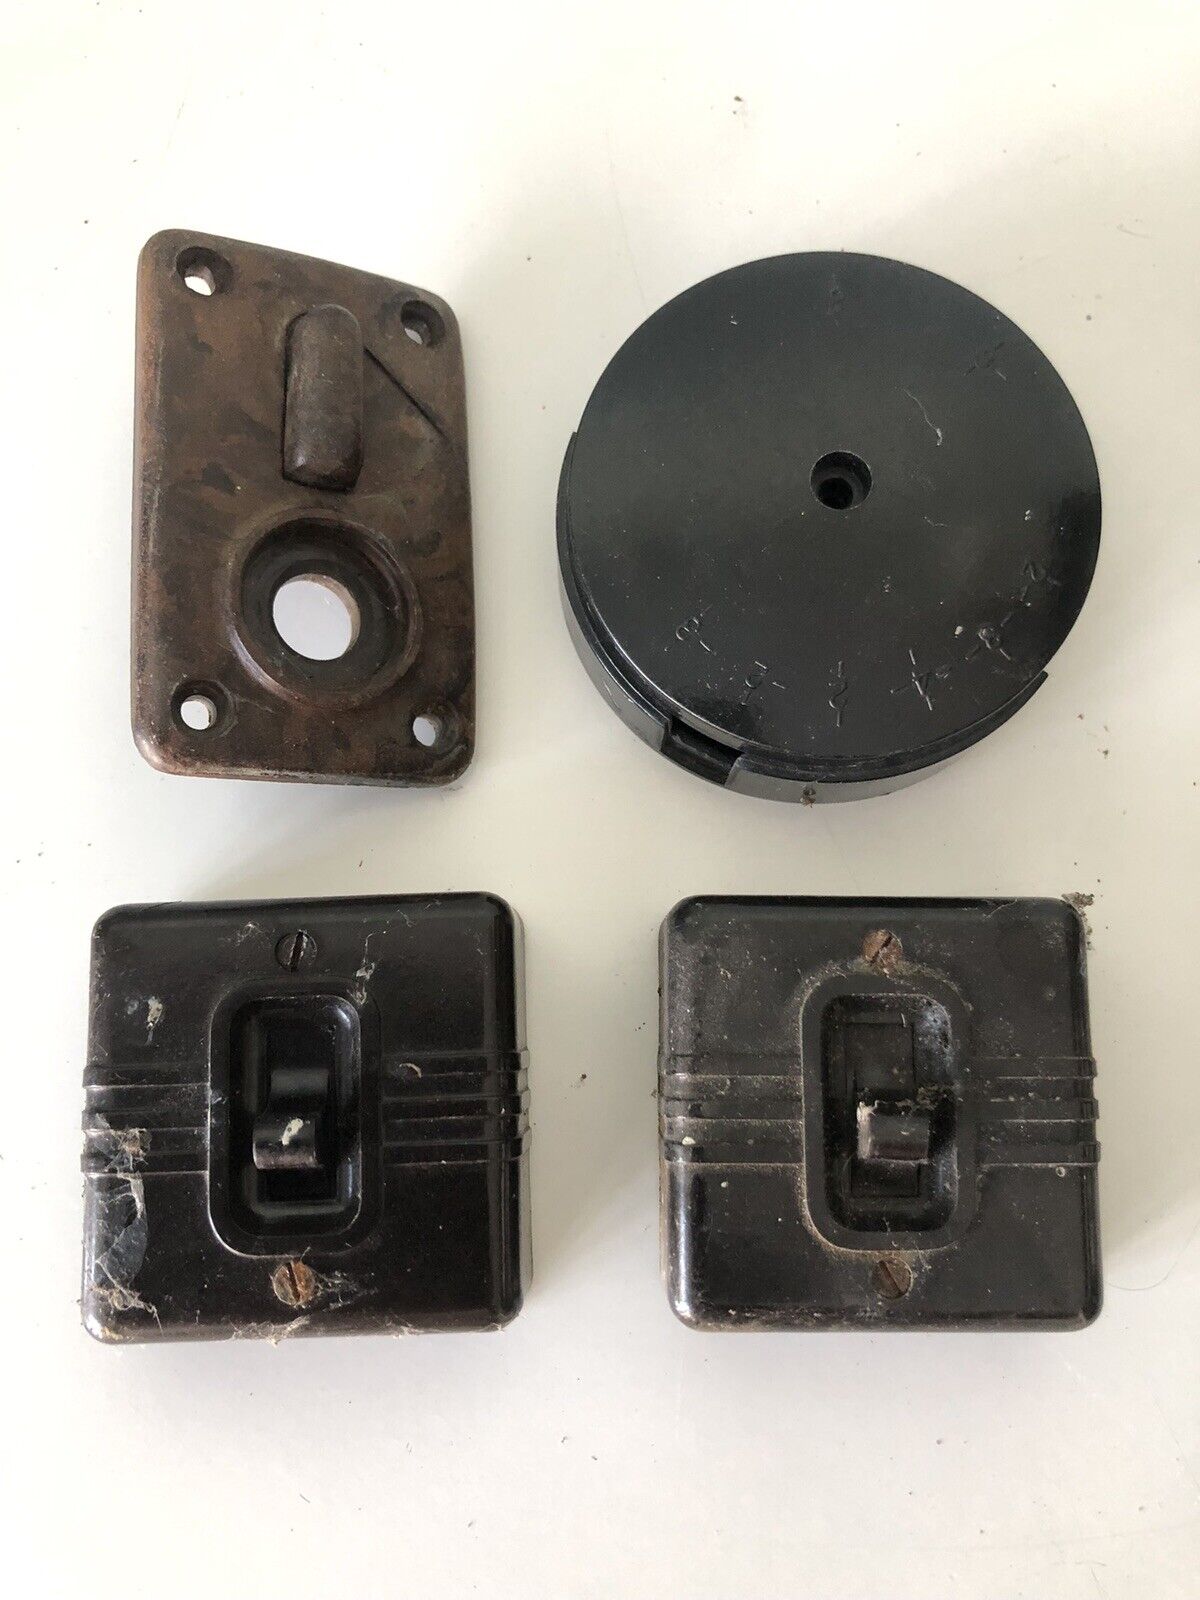 Bakelite light switches and parts - untested